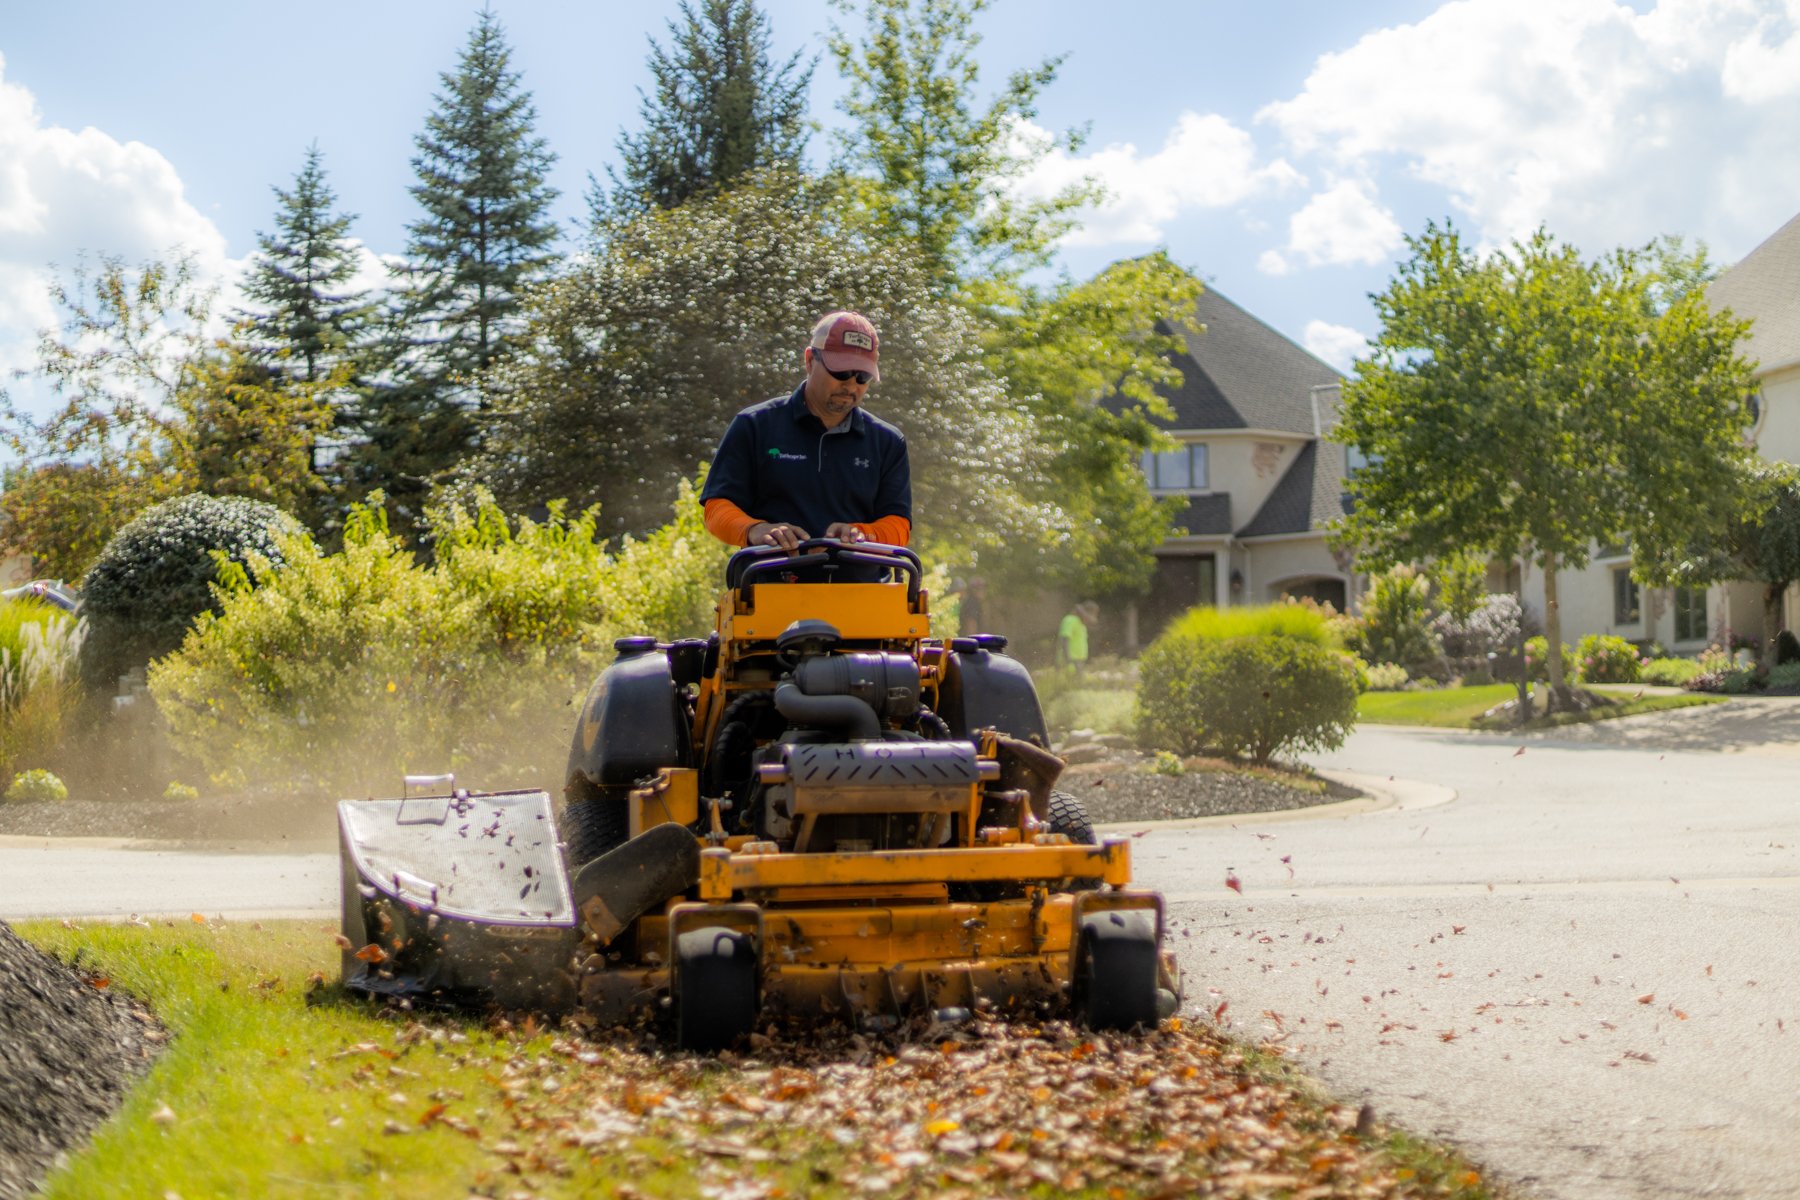 Crew bagging leaves with riding mower